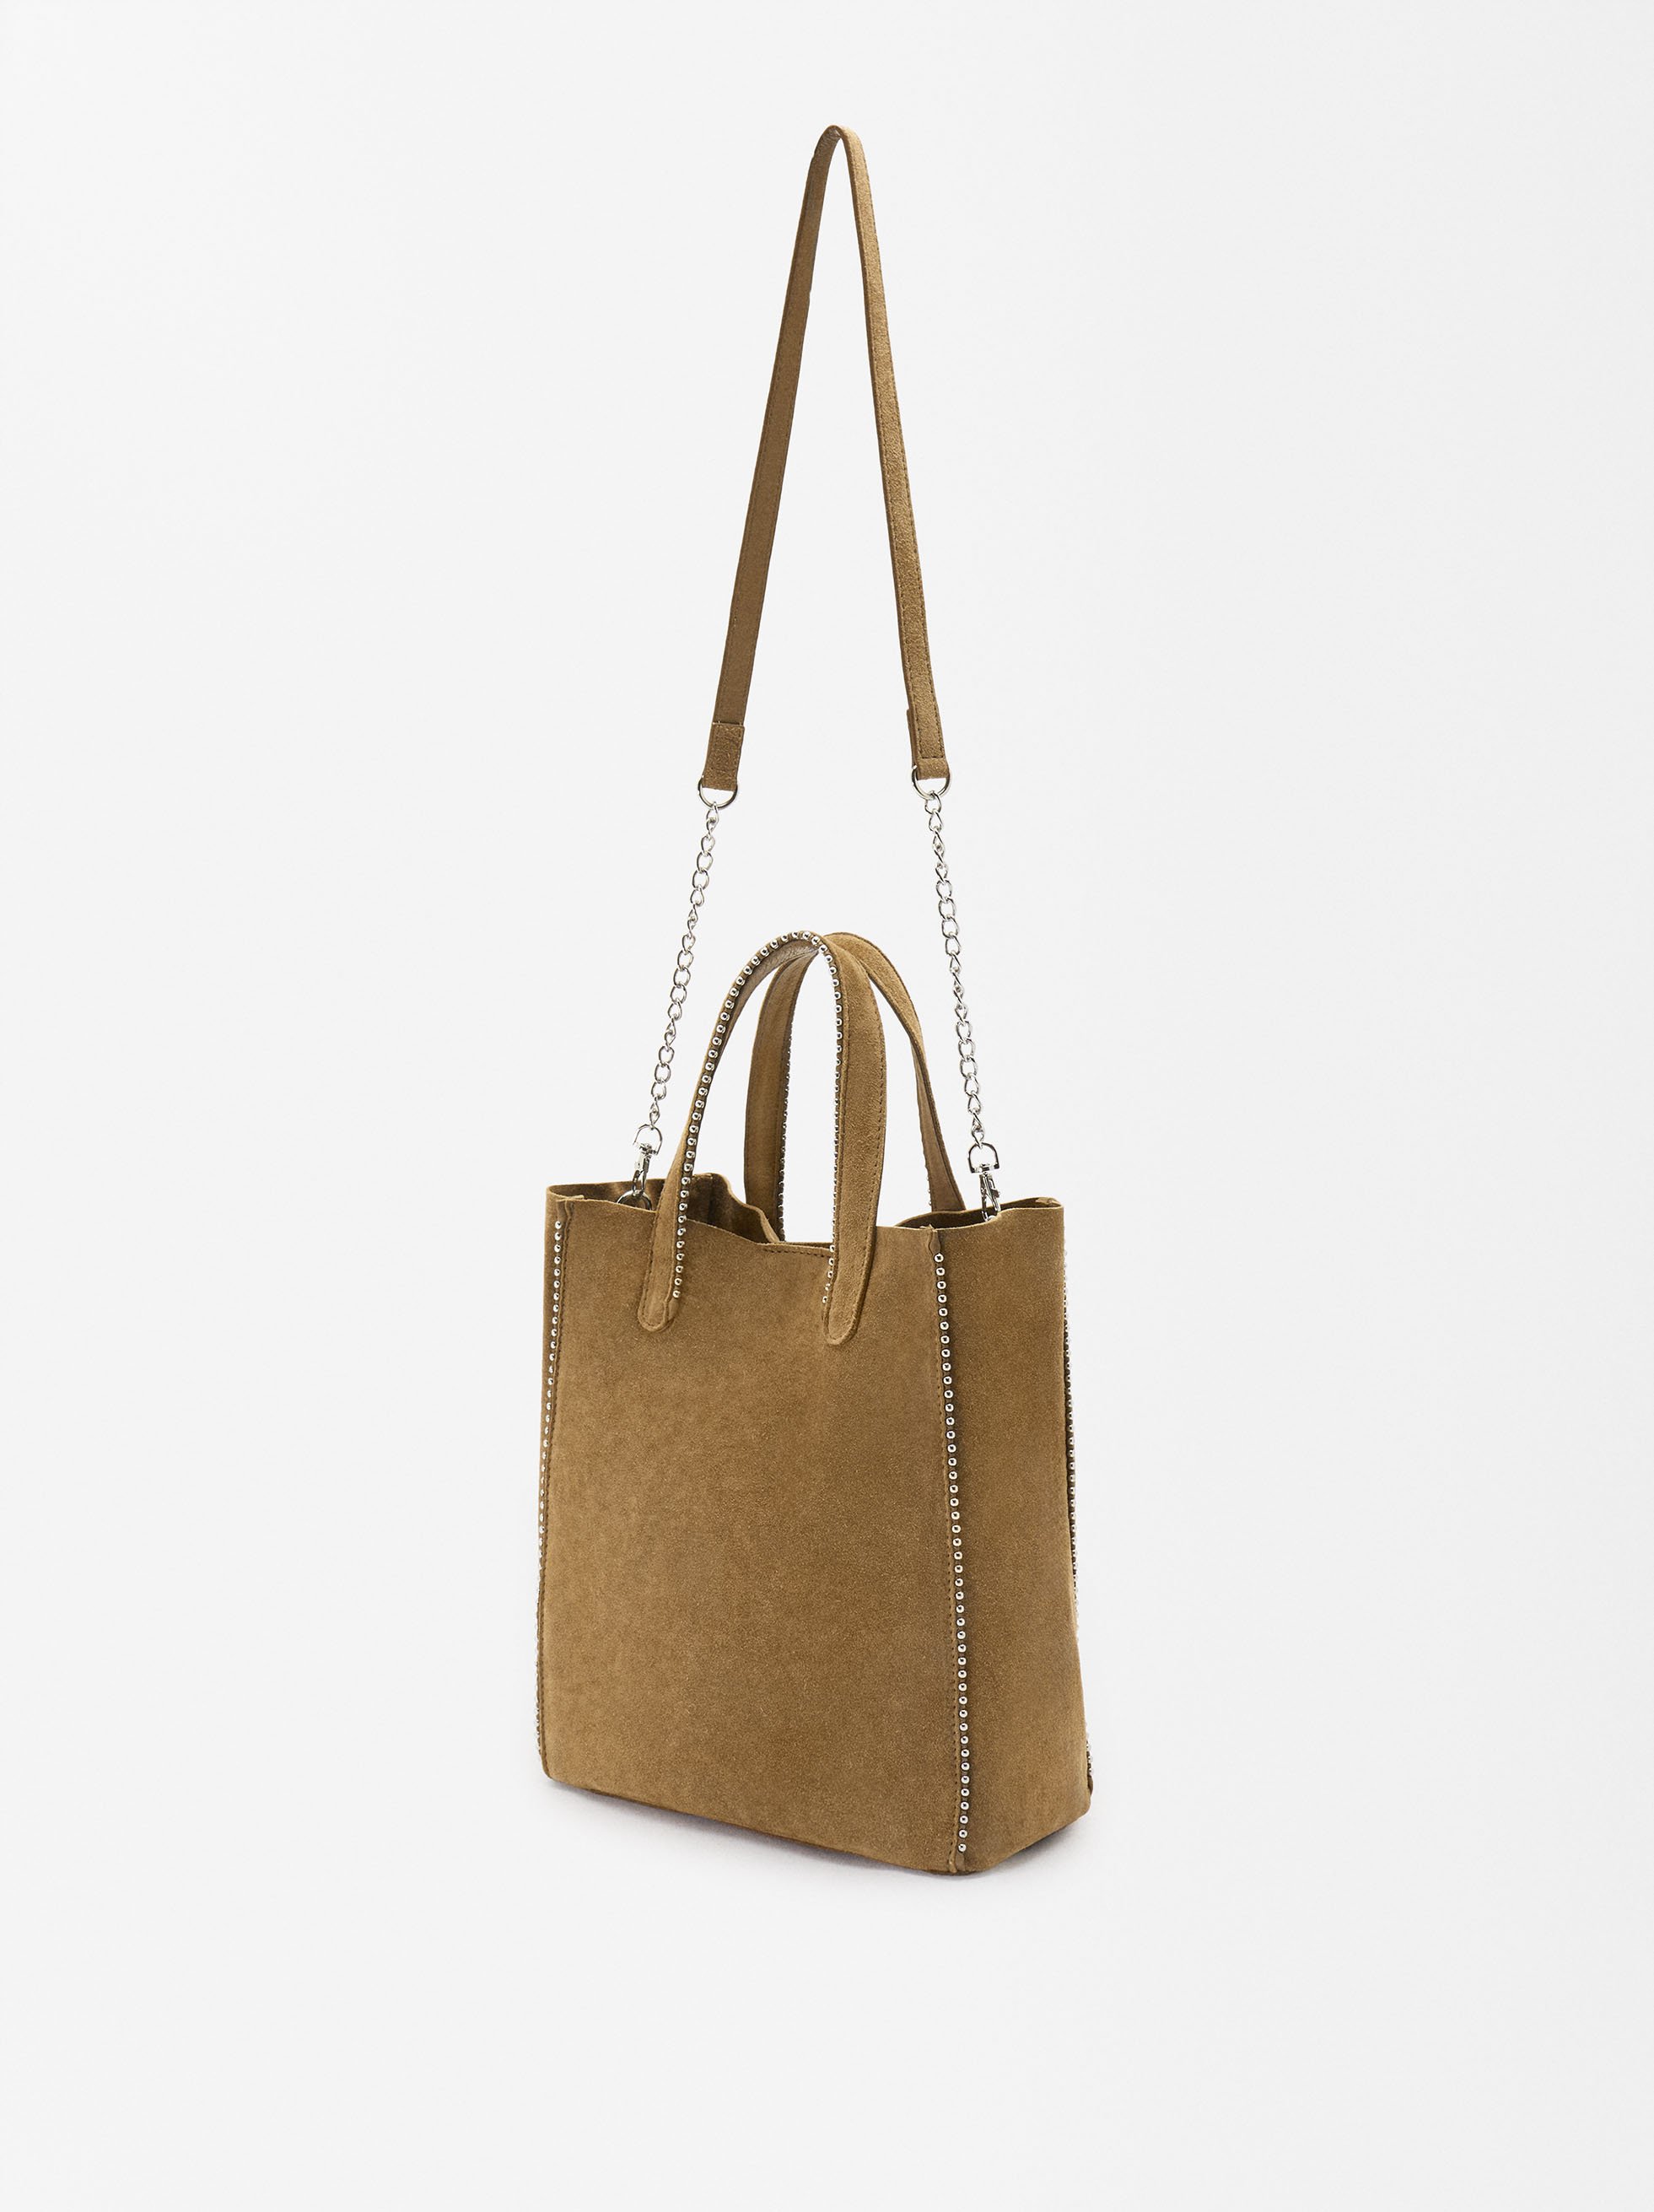 Leather Tote Bag With Pendant - Limited Edition image number 2.0